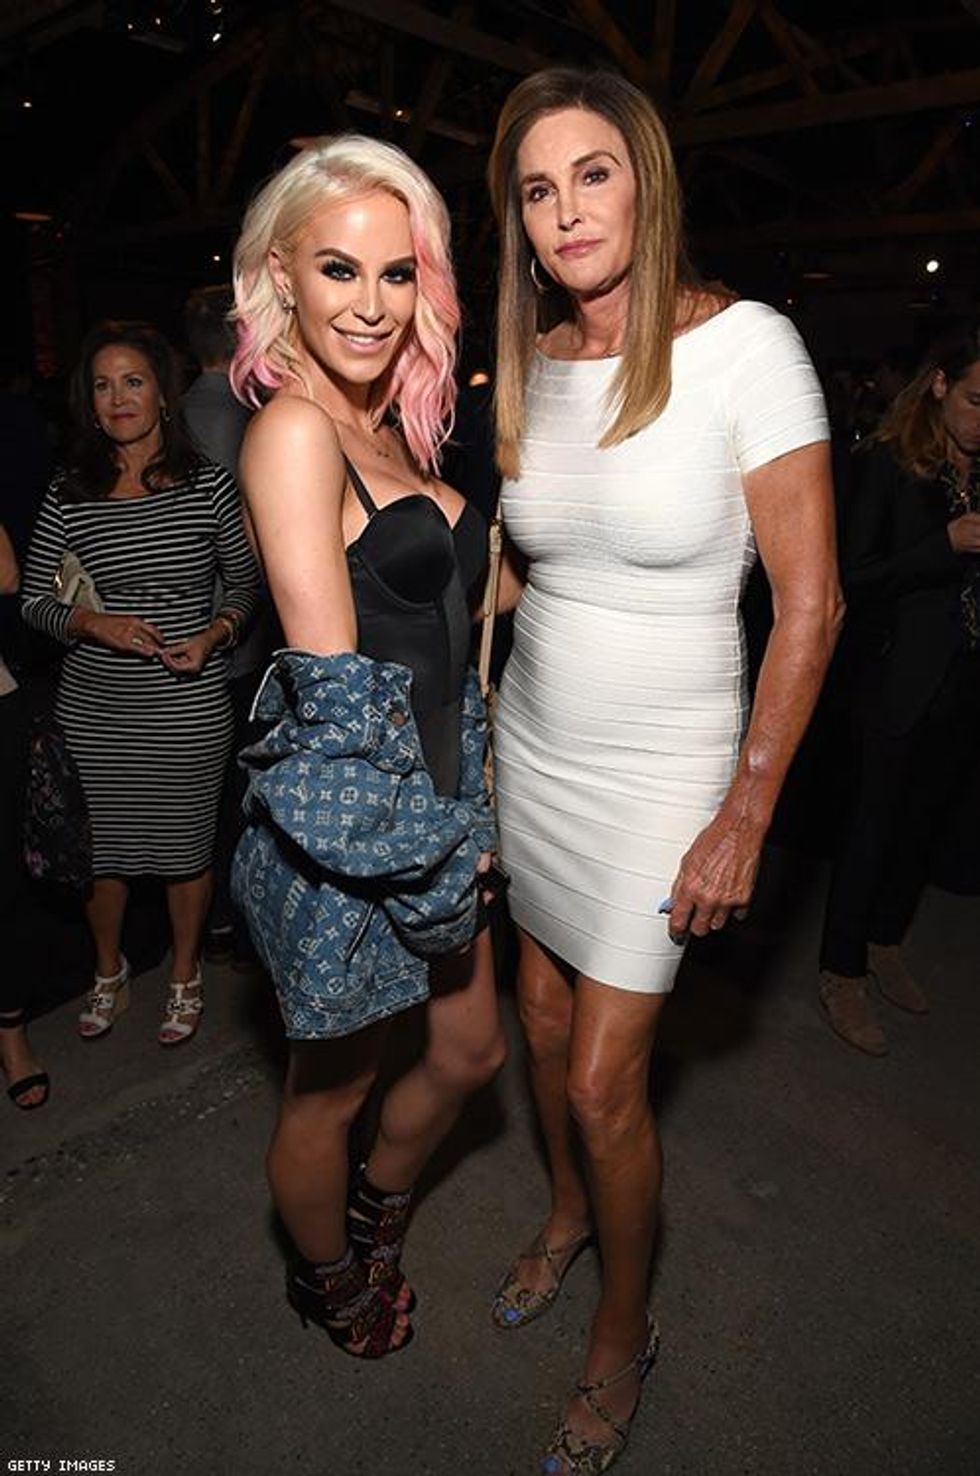 Power 50 Honorees Gigi Gorgeous and Caitlyn Jenner